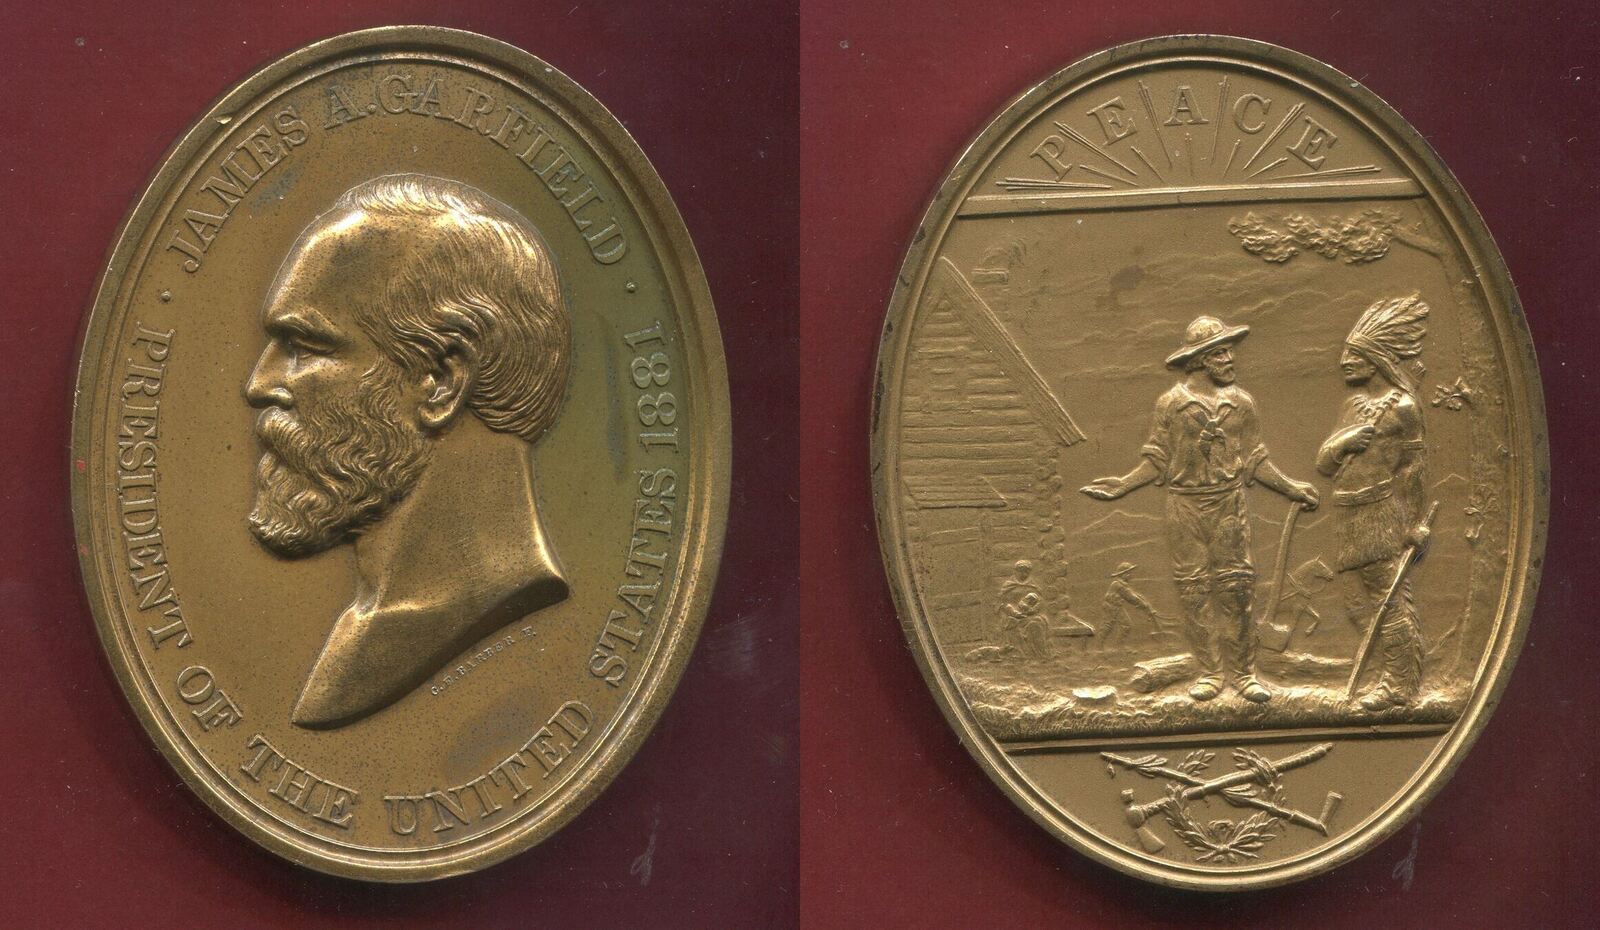 US MINT MEDALS OF THE PRESIDENTS - アンティーク/コレクション